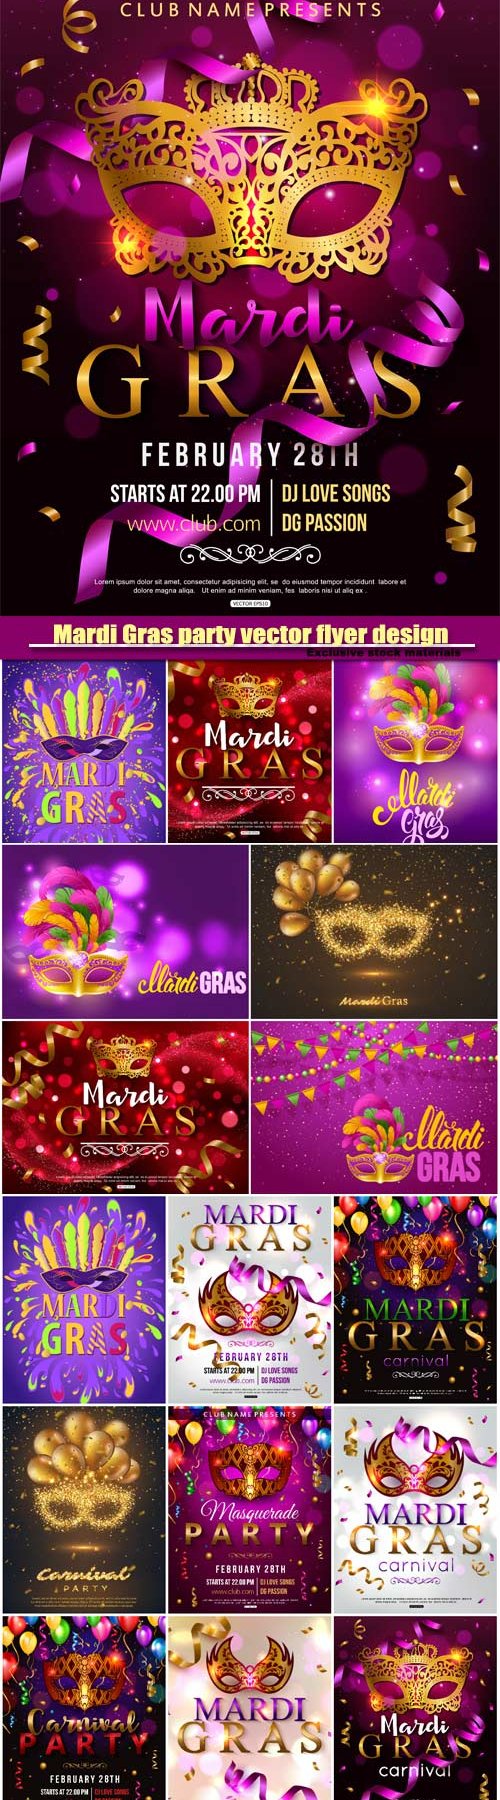 Mardi Gras party vector flyer design with carnival mask